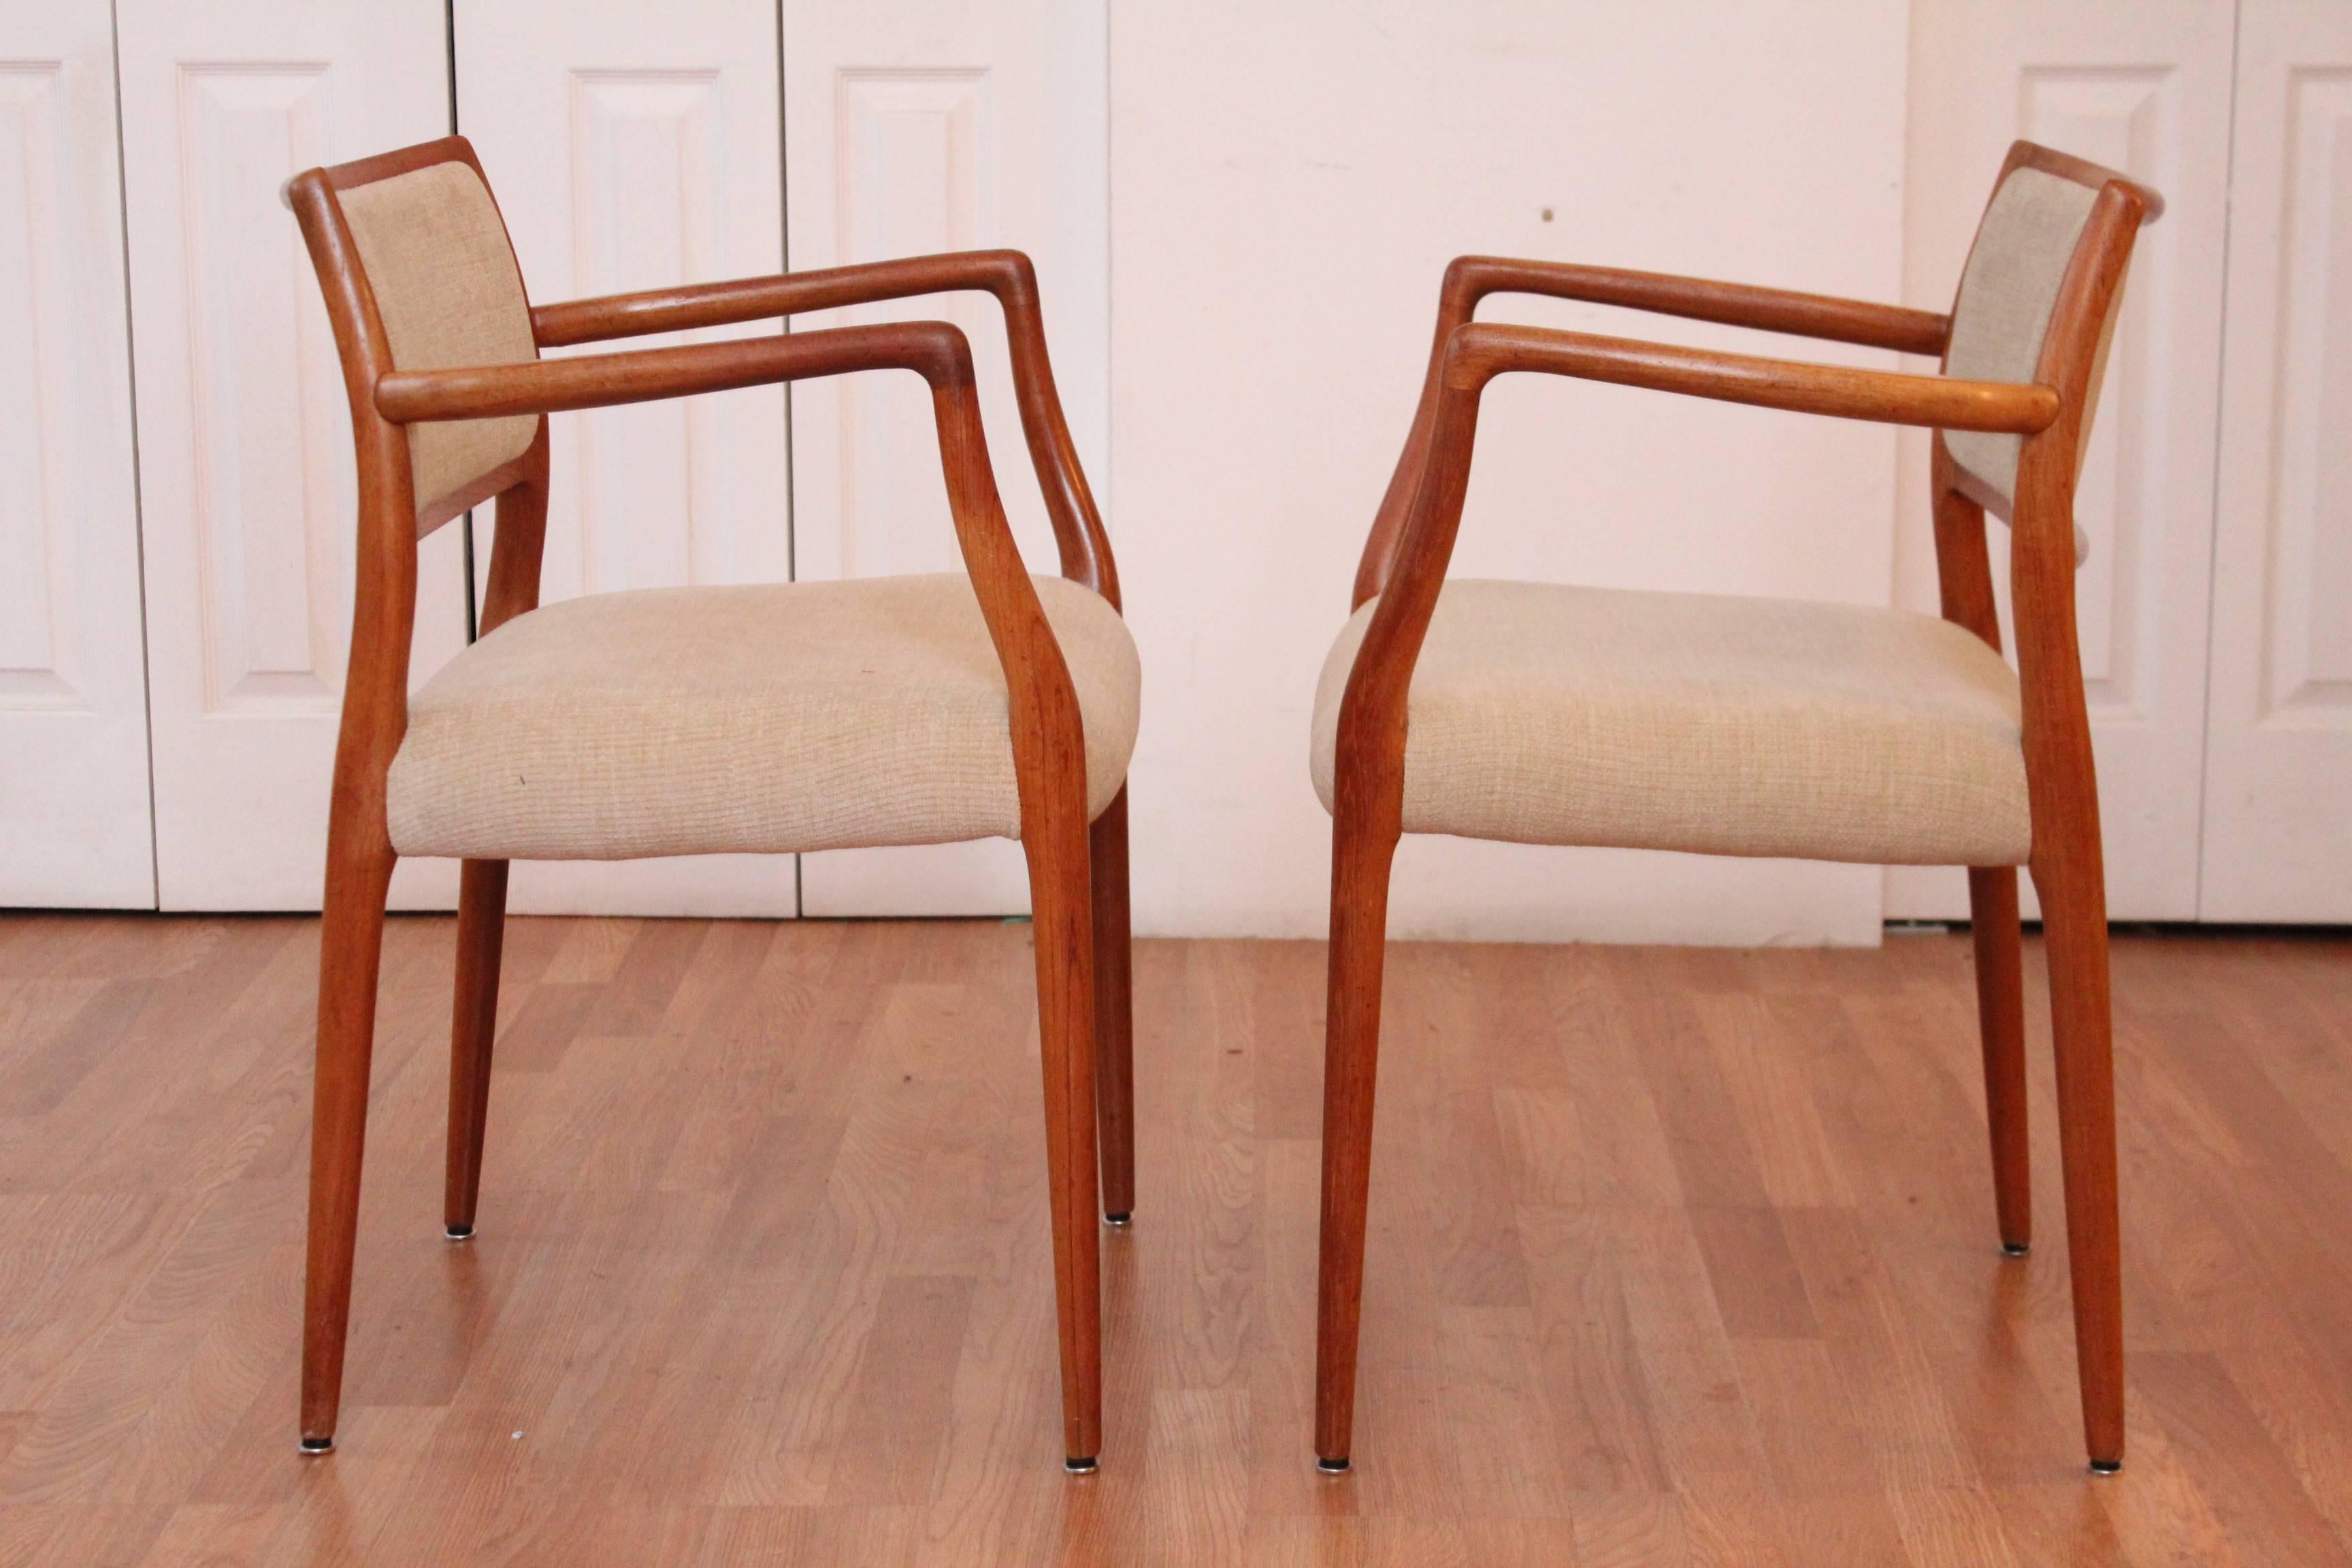 Mid-20th Century Six Danish Modern Dining Chairs by Niels Otto Møller